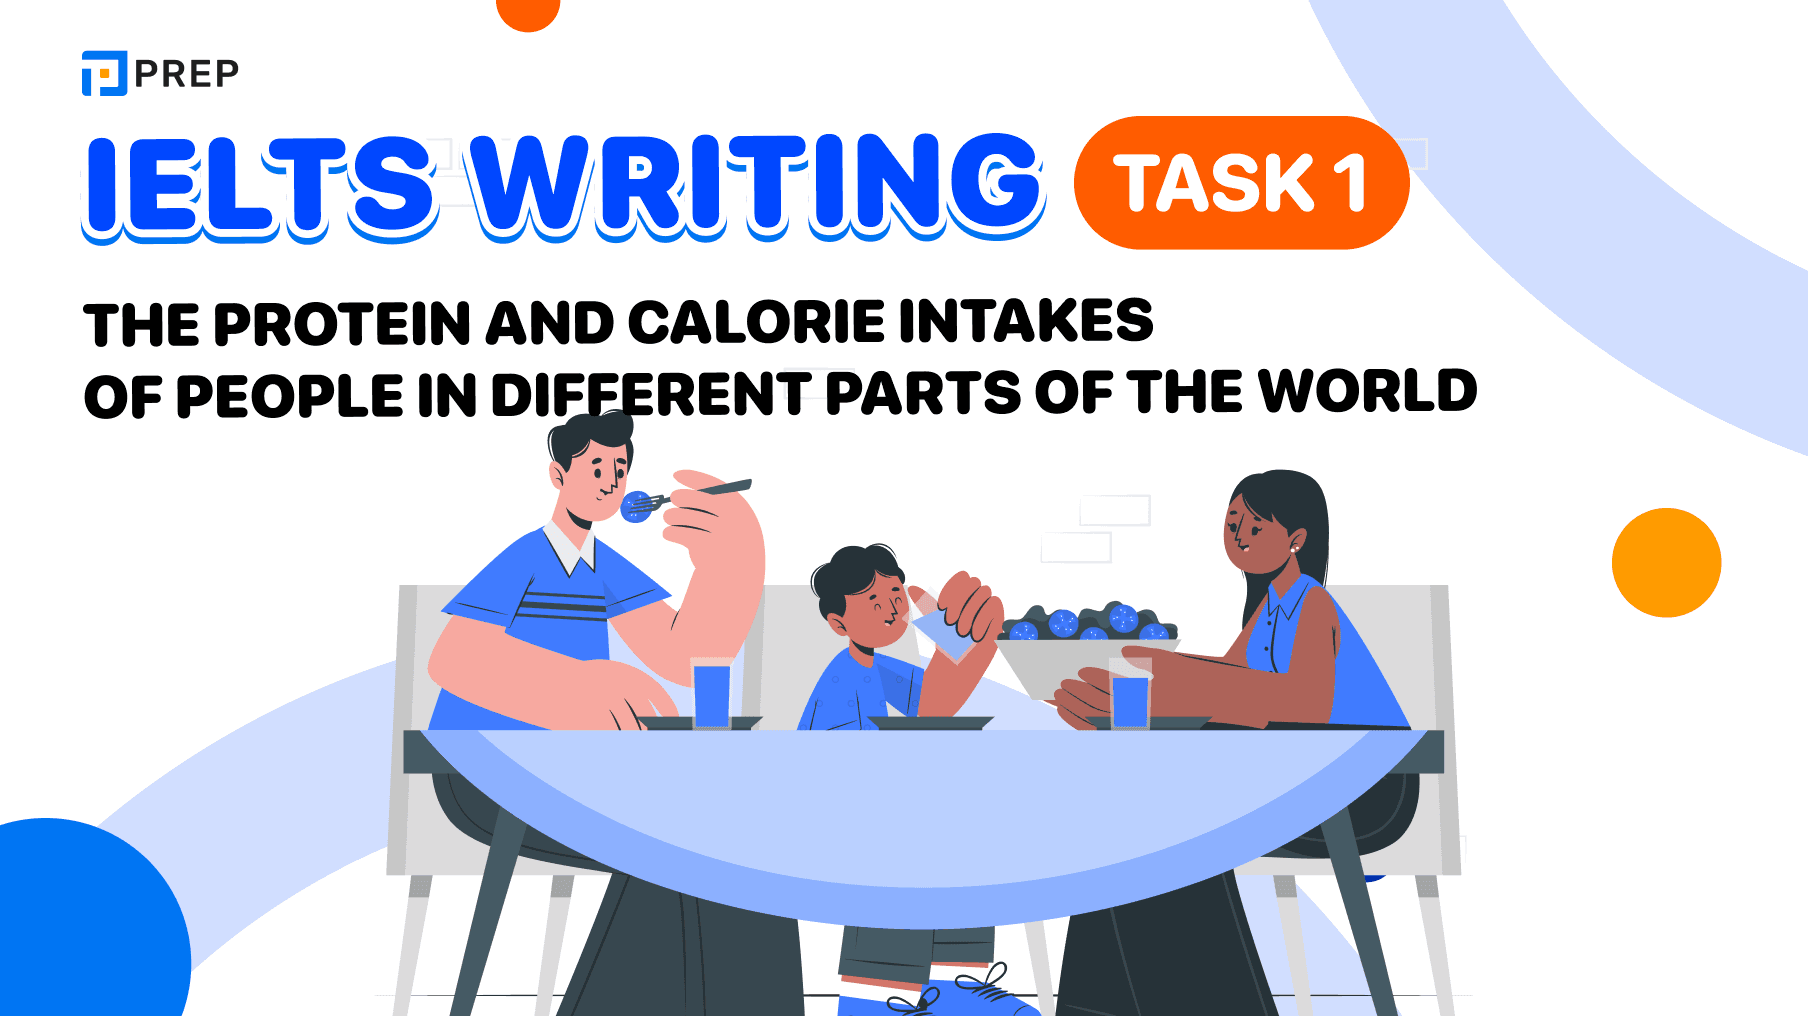 Đề bài, bài mẫu IELTS Writing Task 1: The protein and calorie intakes of people in different parts of the world